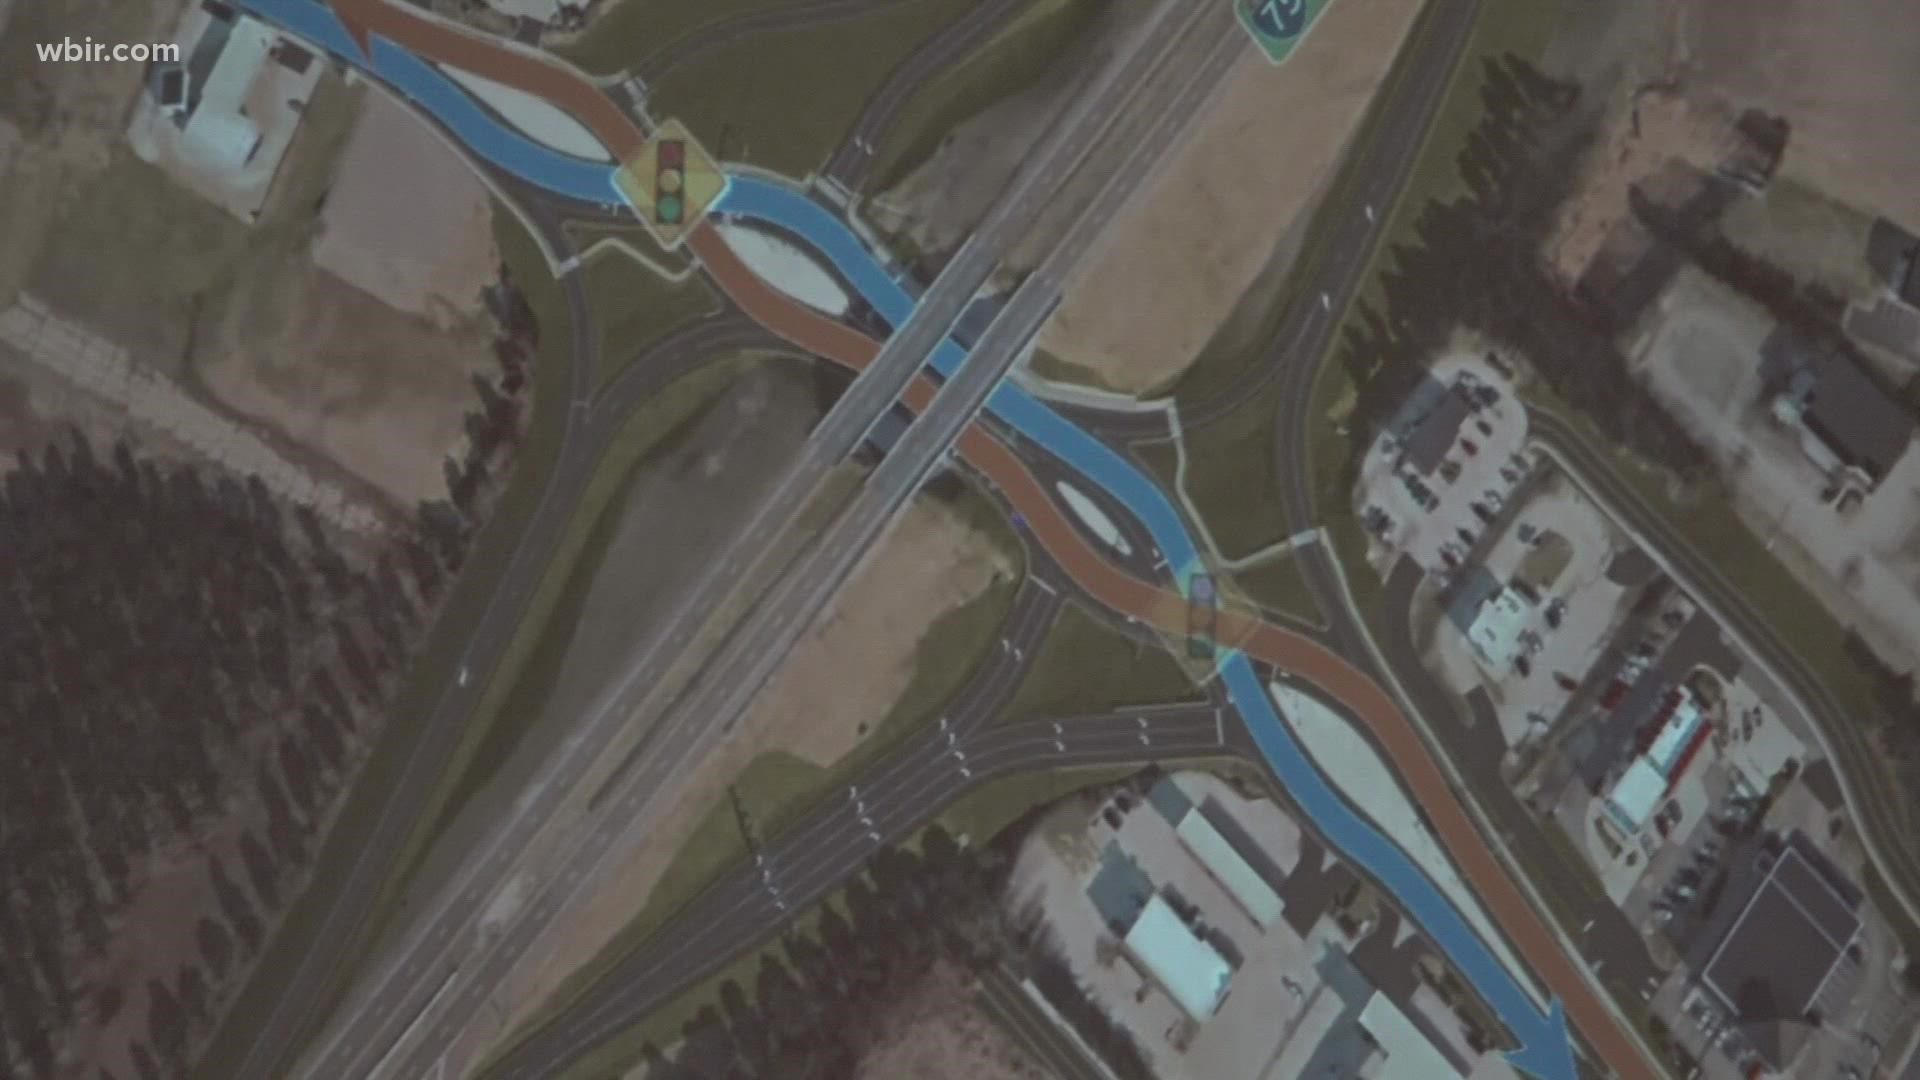 Officials said that the project is to build a "diverging diamond interchange," changing from the traditional interchange there now.